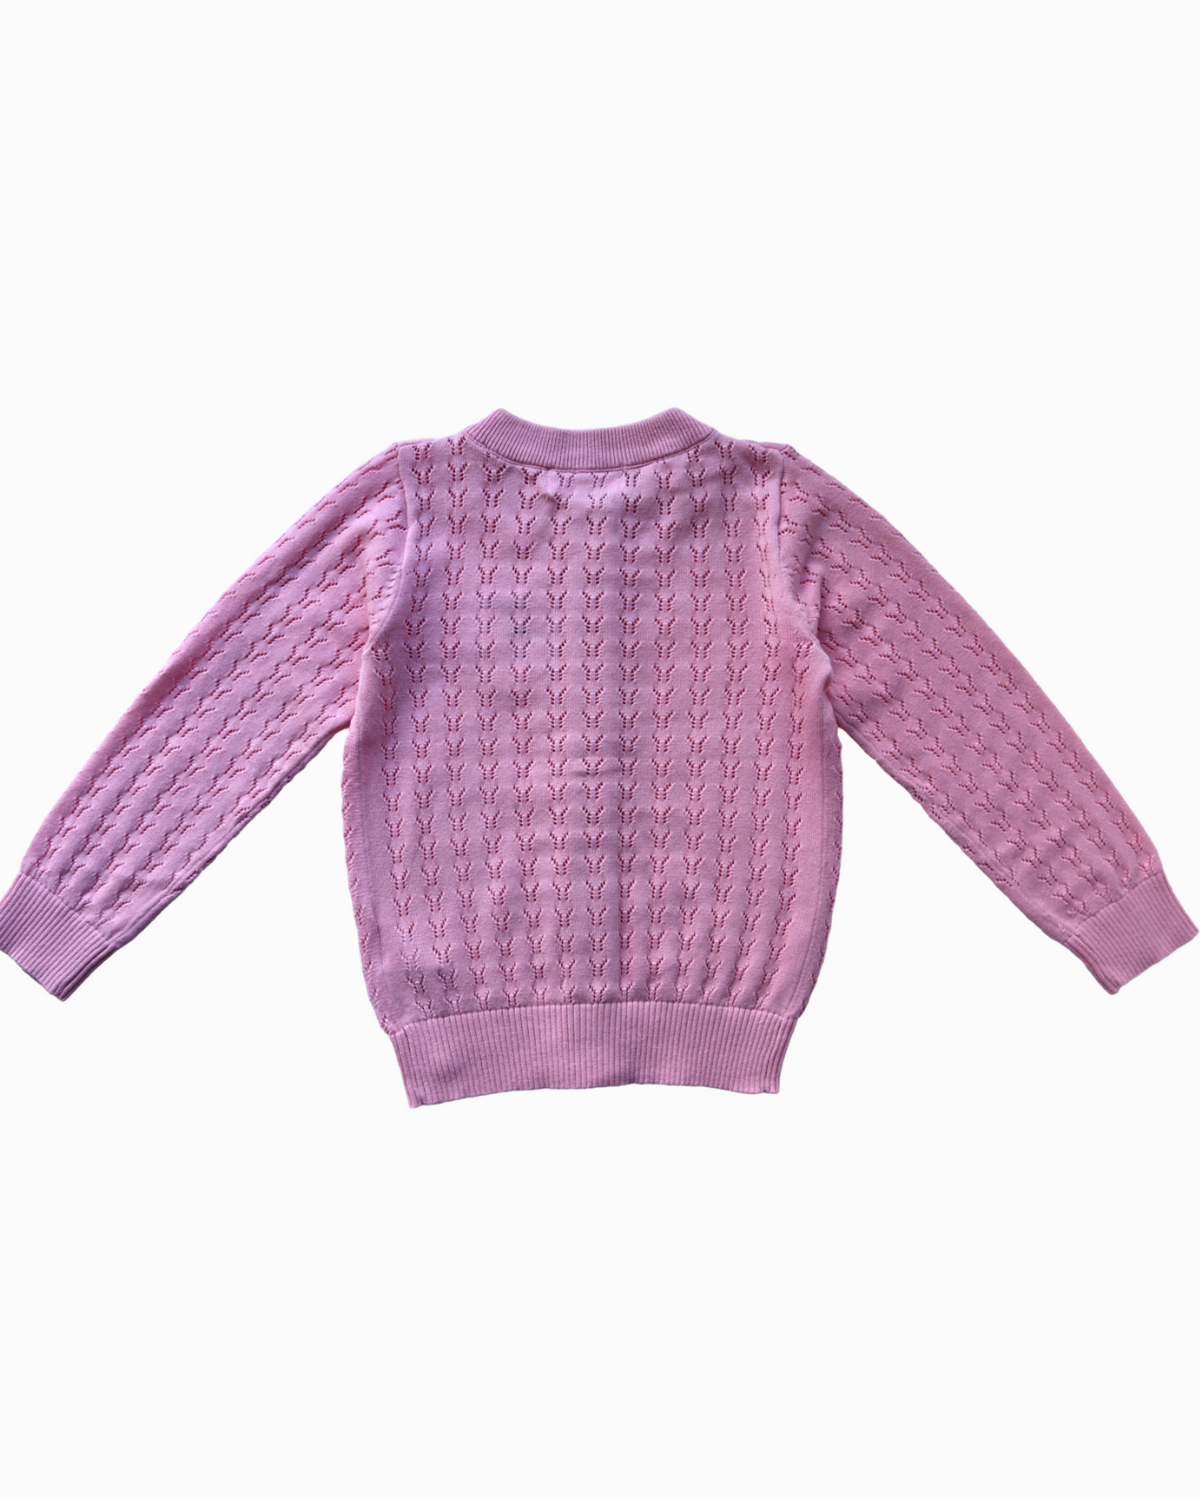 Classic Pointelle Girls Cardigan in Pale Pink